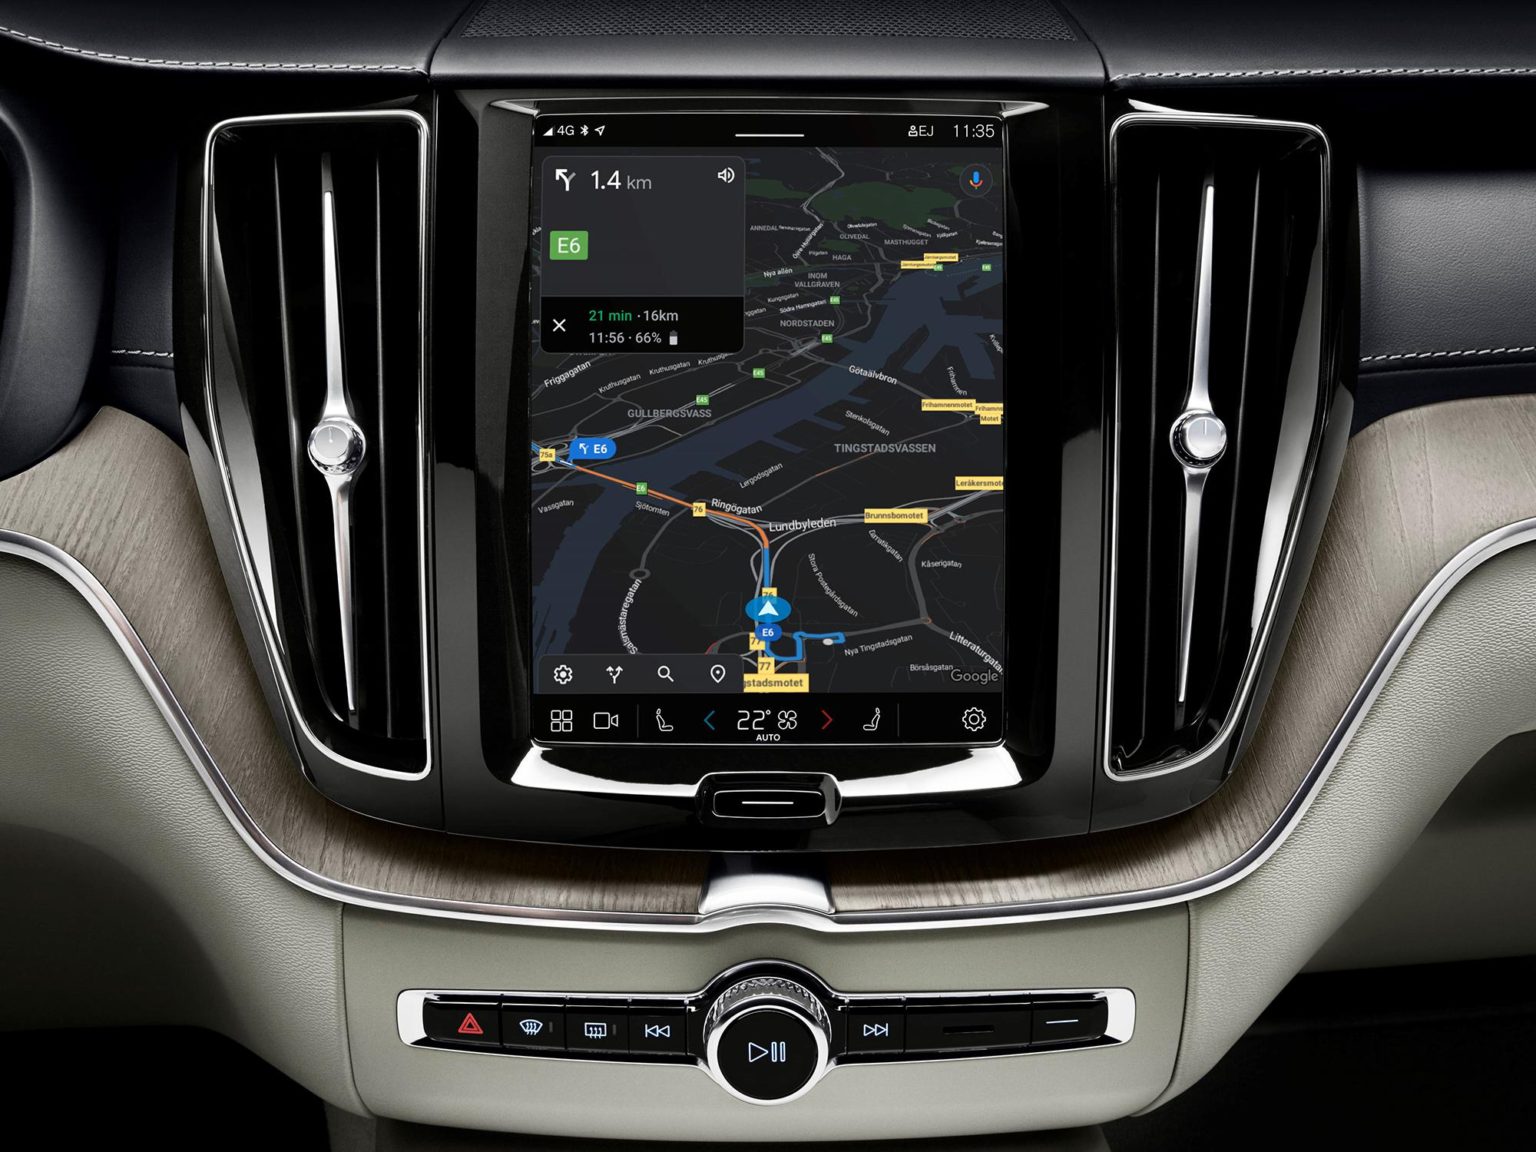 Volvo and Google have partnered on a new infotainment system.